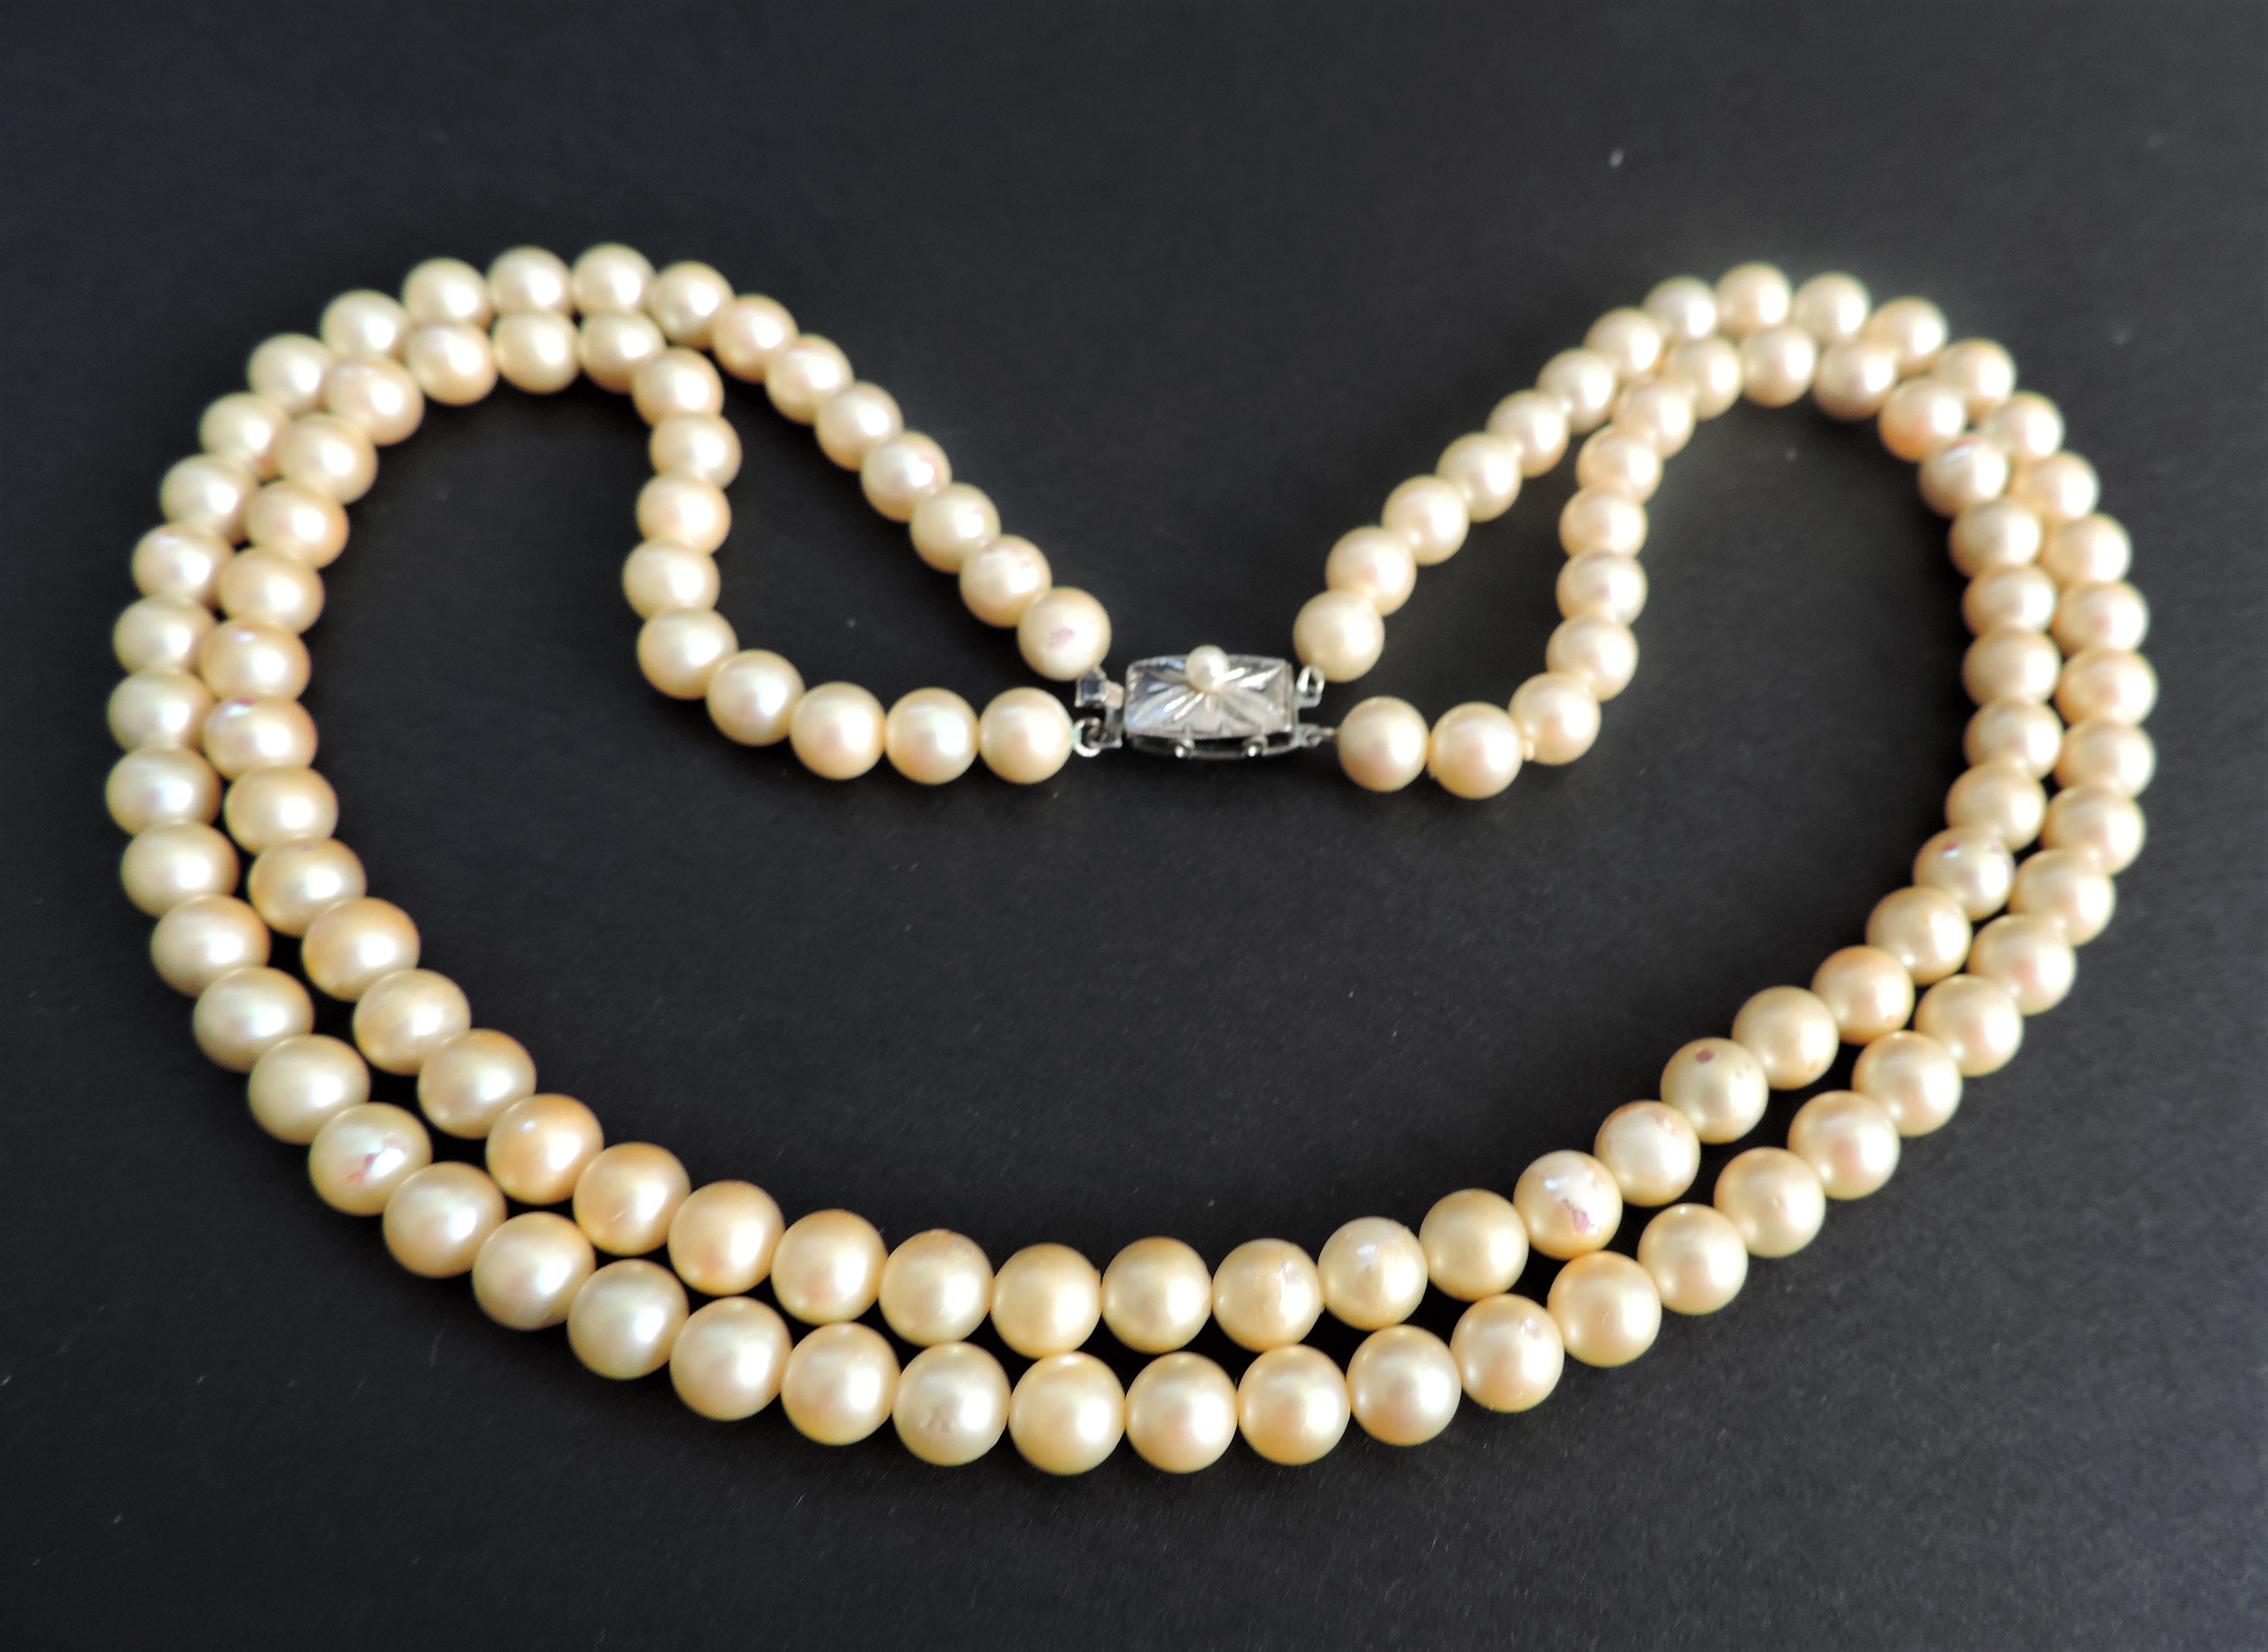 Vintage Pearl Necklace Silver Clasp - Image 2 of 4